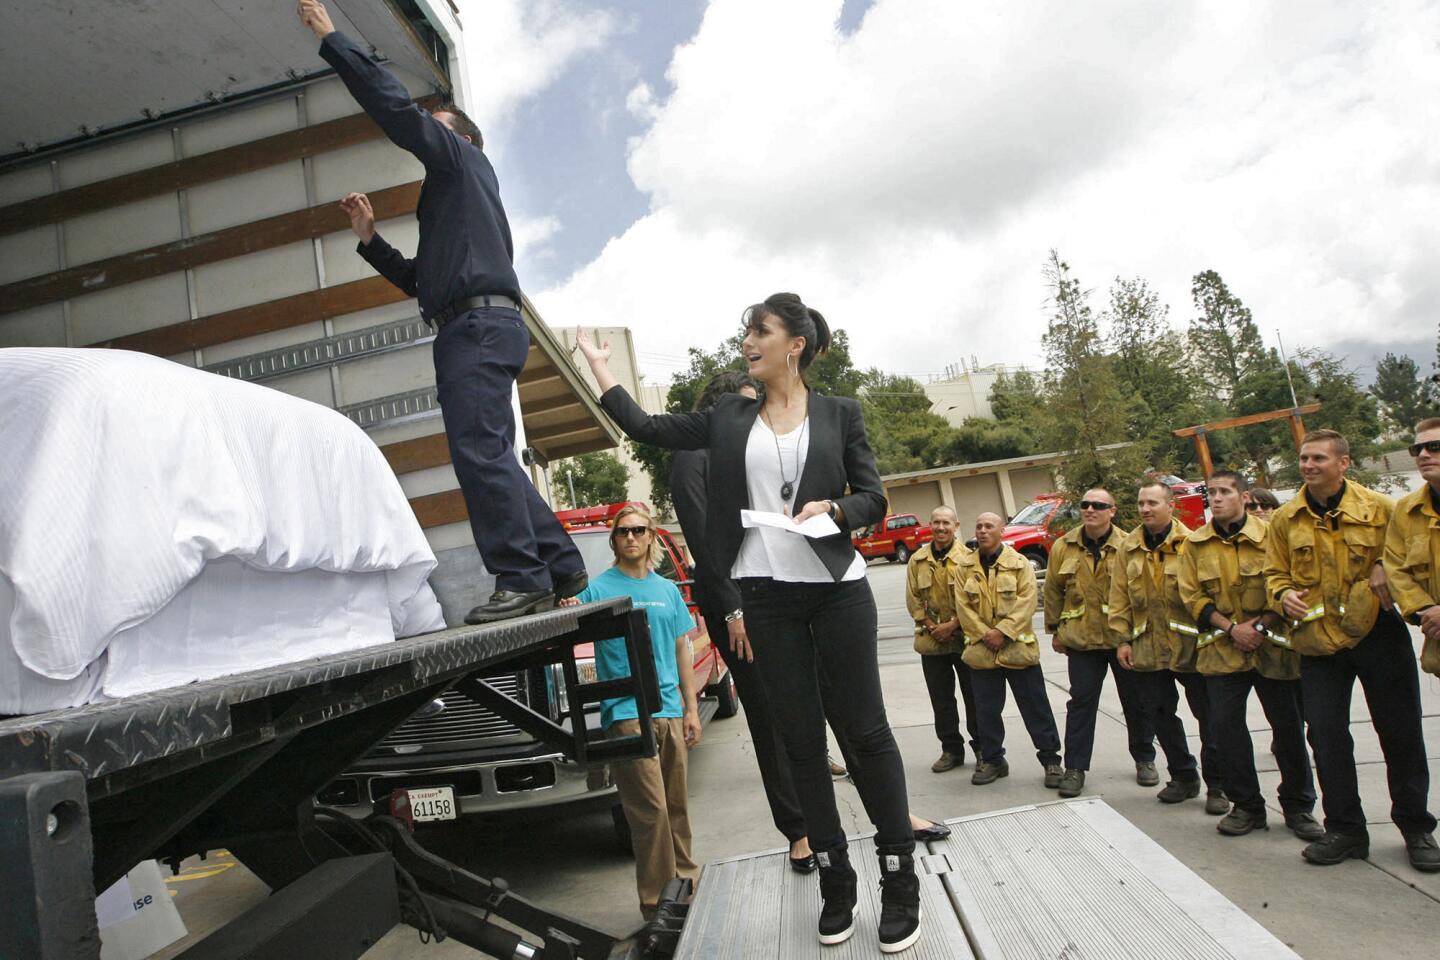 Actress Emmanuelle Chriqui and LA County Capt. Pat Sprengel unveil a truck full of new mattresses being donated by the Westin Hotels to the firefighters of LA County Fire Camp 2 on Monday, April 15, 2013.